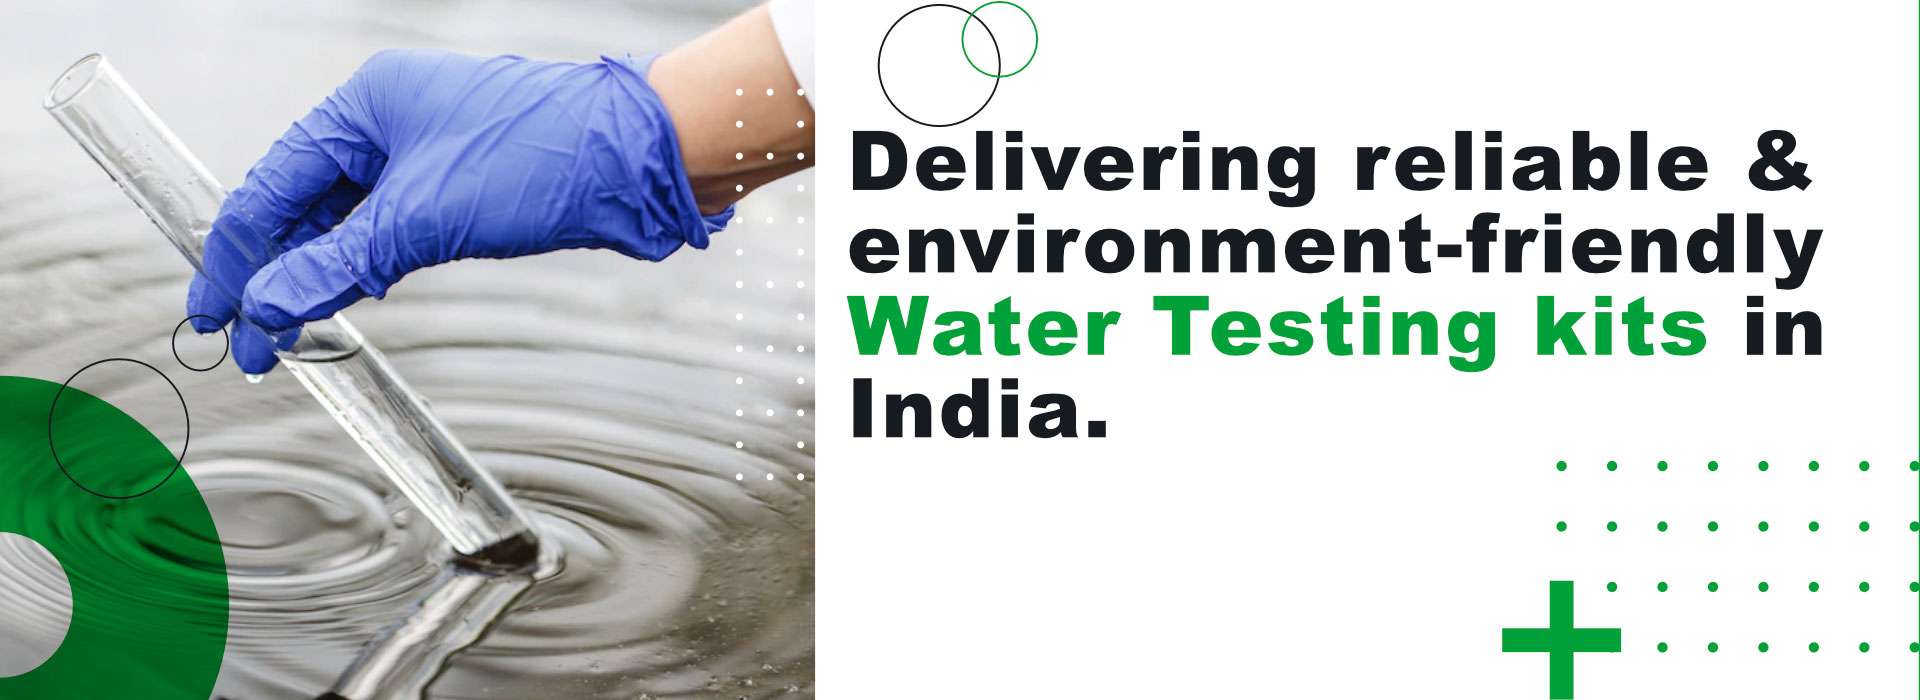  Delivering reliable & environment-friendly water Testing kits in India Manufacturers in Amritsar